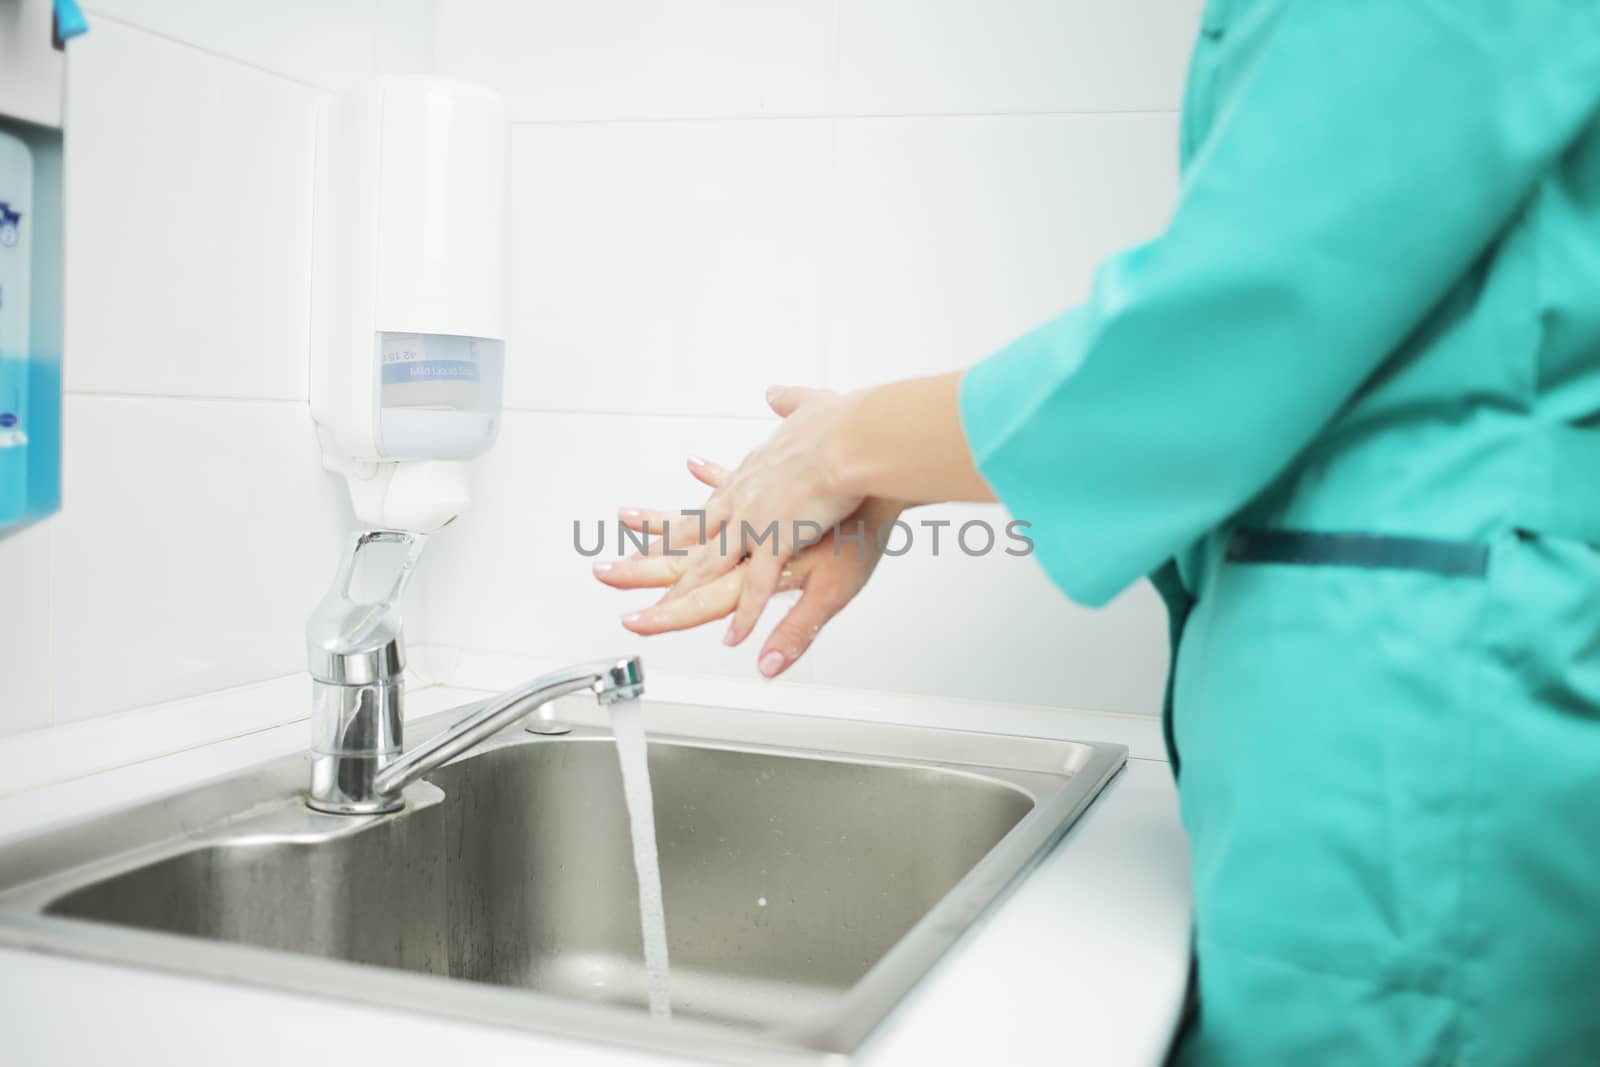 A woman doctor in a protective mask and medical uniform washes her hands thoroughly in the hospital. Soaped hands in foam